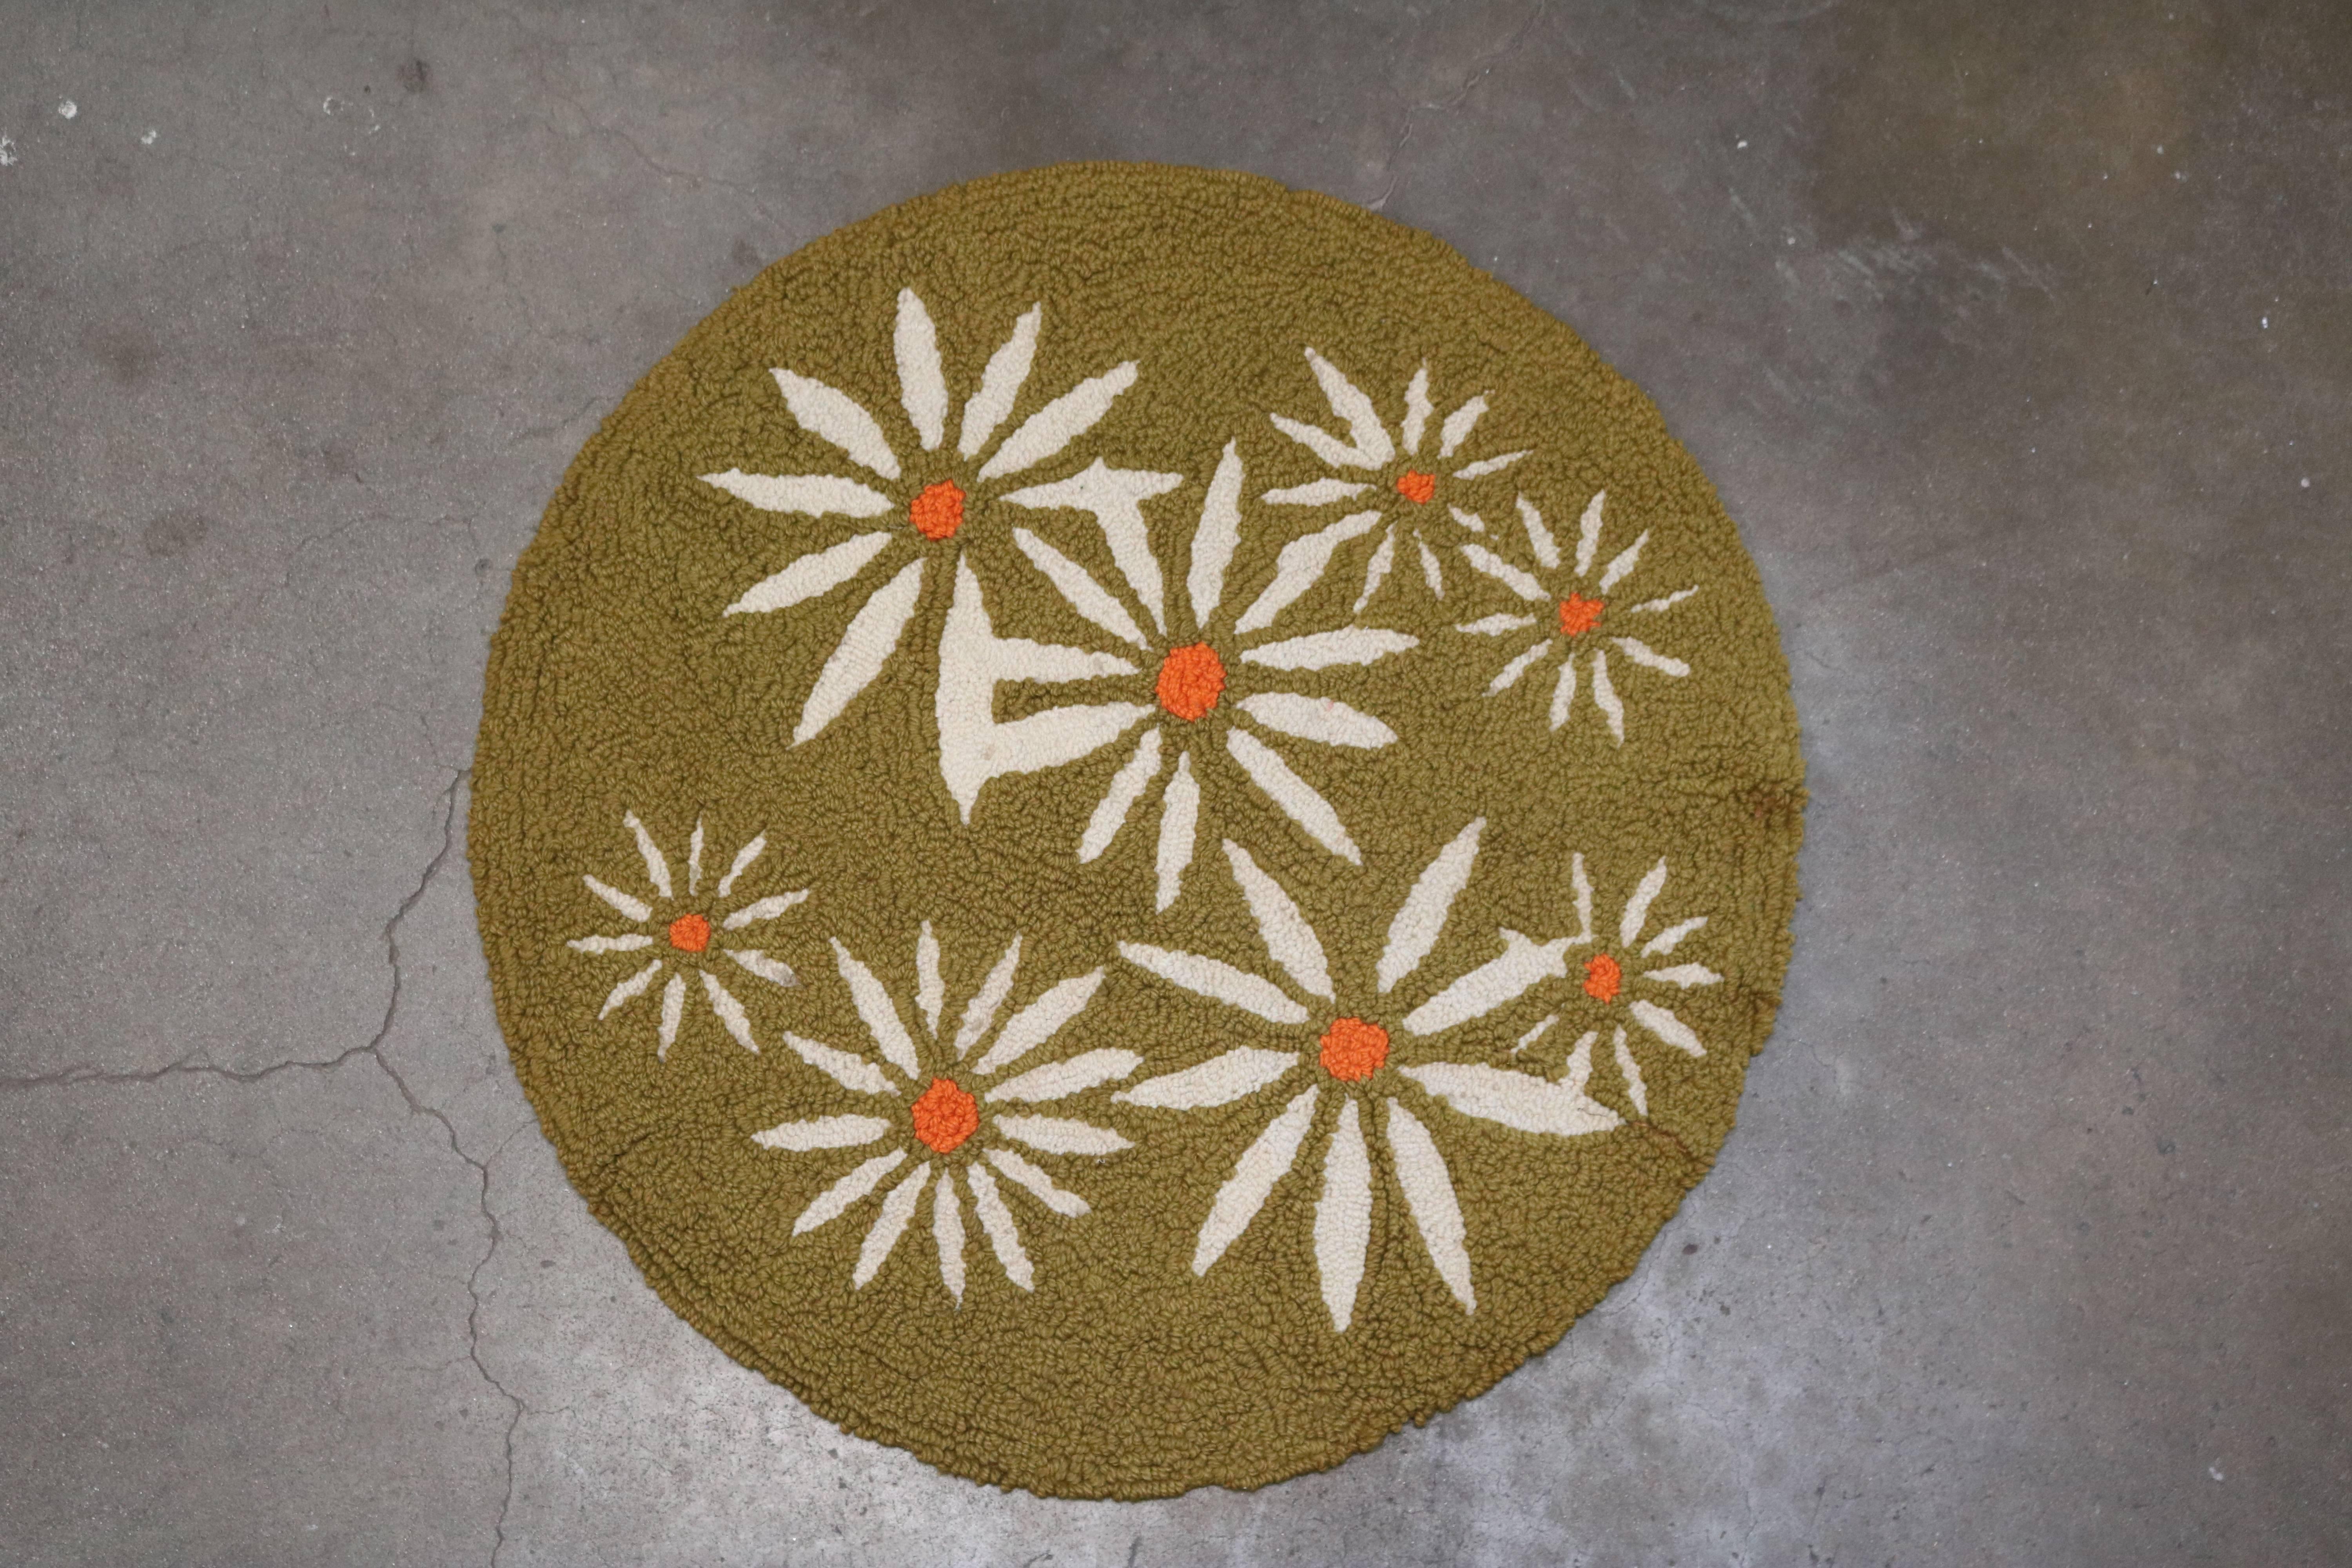 Round rug measures 3 ft. in diameter and is in an avocado green shade with white daisy design.
We have had a new backing put on the rug recently.